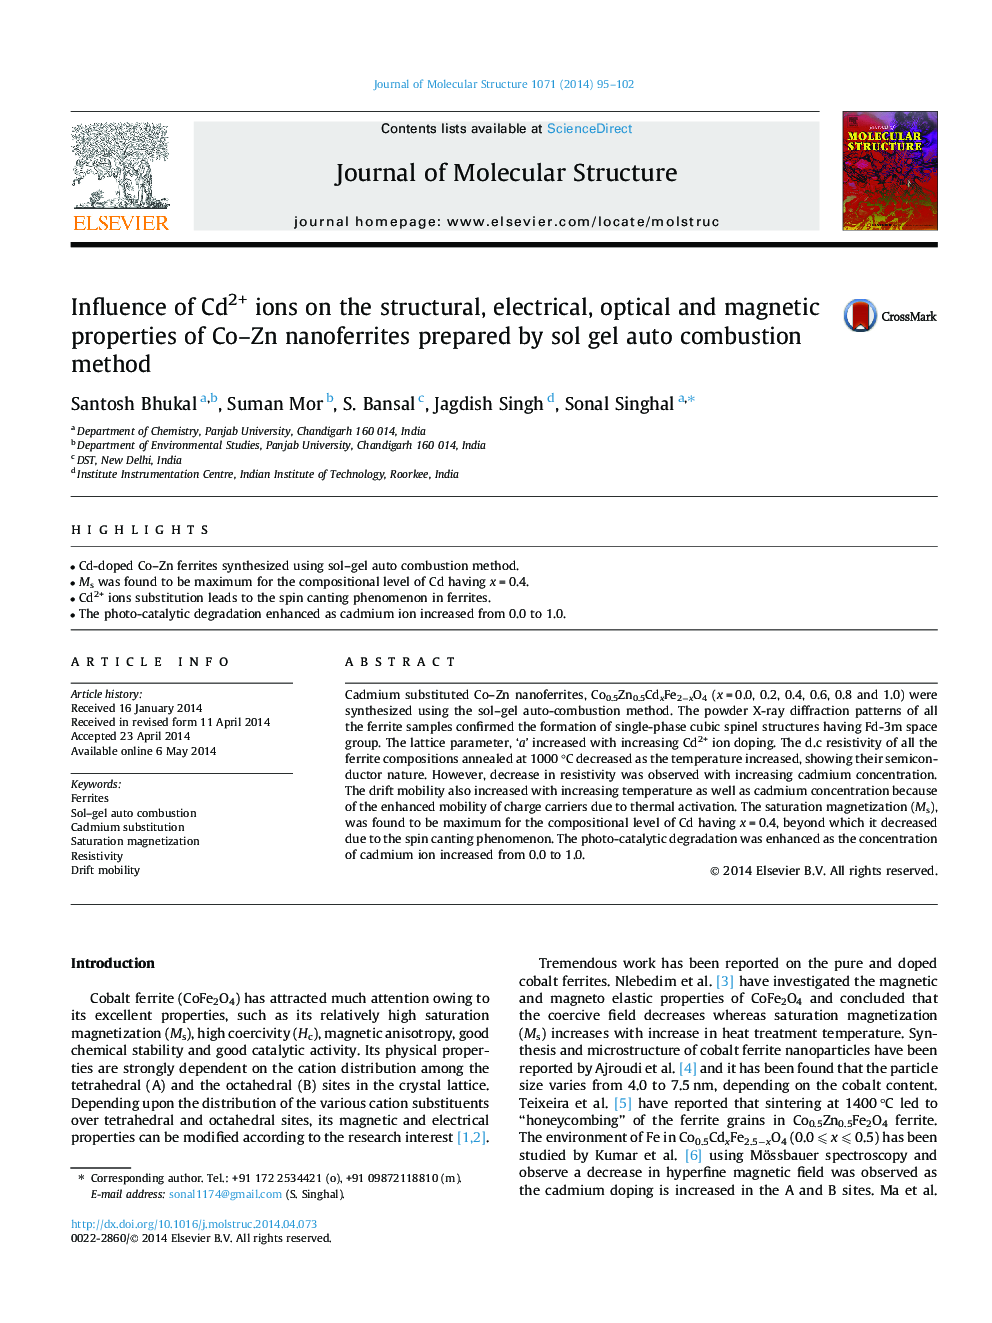 Influence of Cd2+ ions on the structural, electrical, optical and magnetic properties of Co–Zn nanoferrites prepared by sol gel auto combustion method